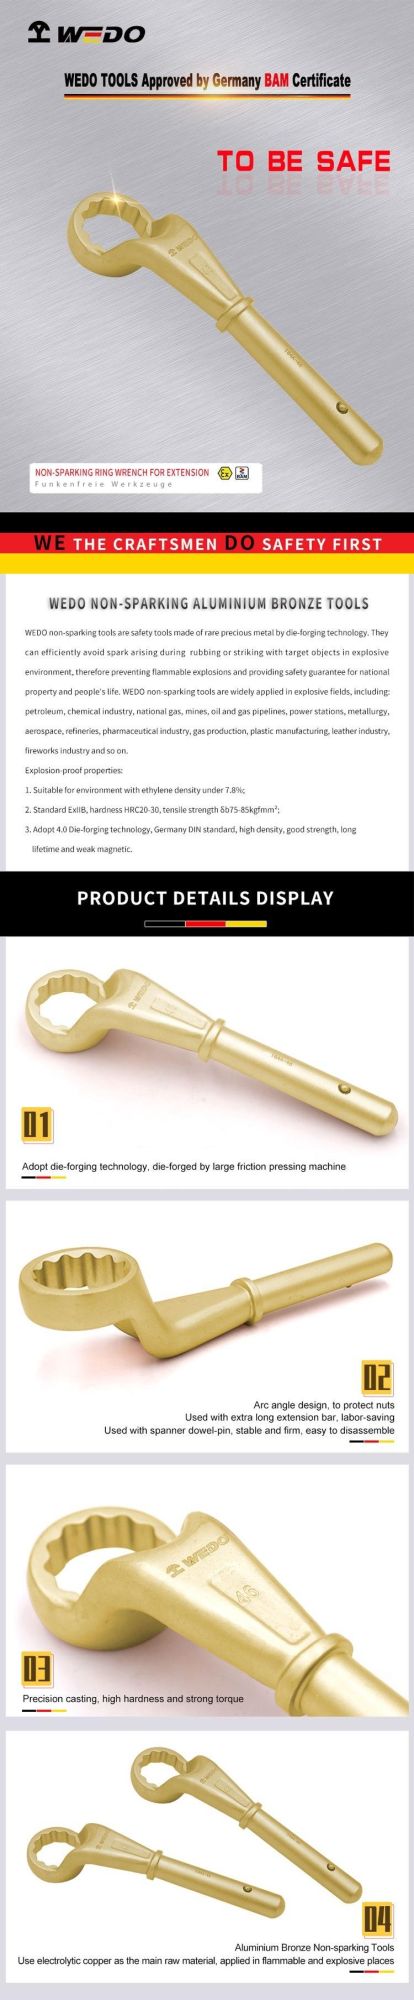 Wedo Aluminium Bronze Non Sparking Ring Wrench for Extension